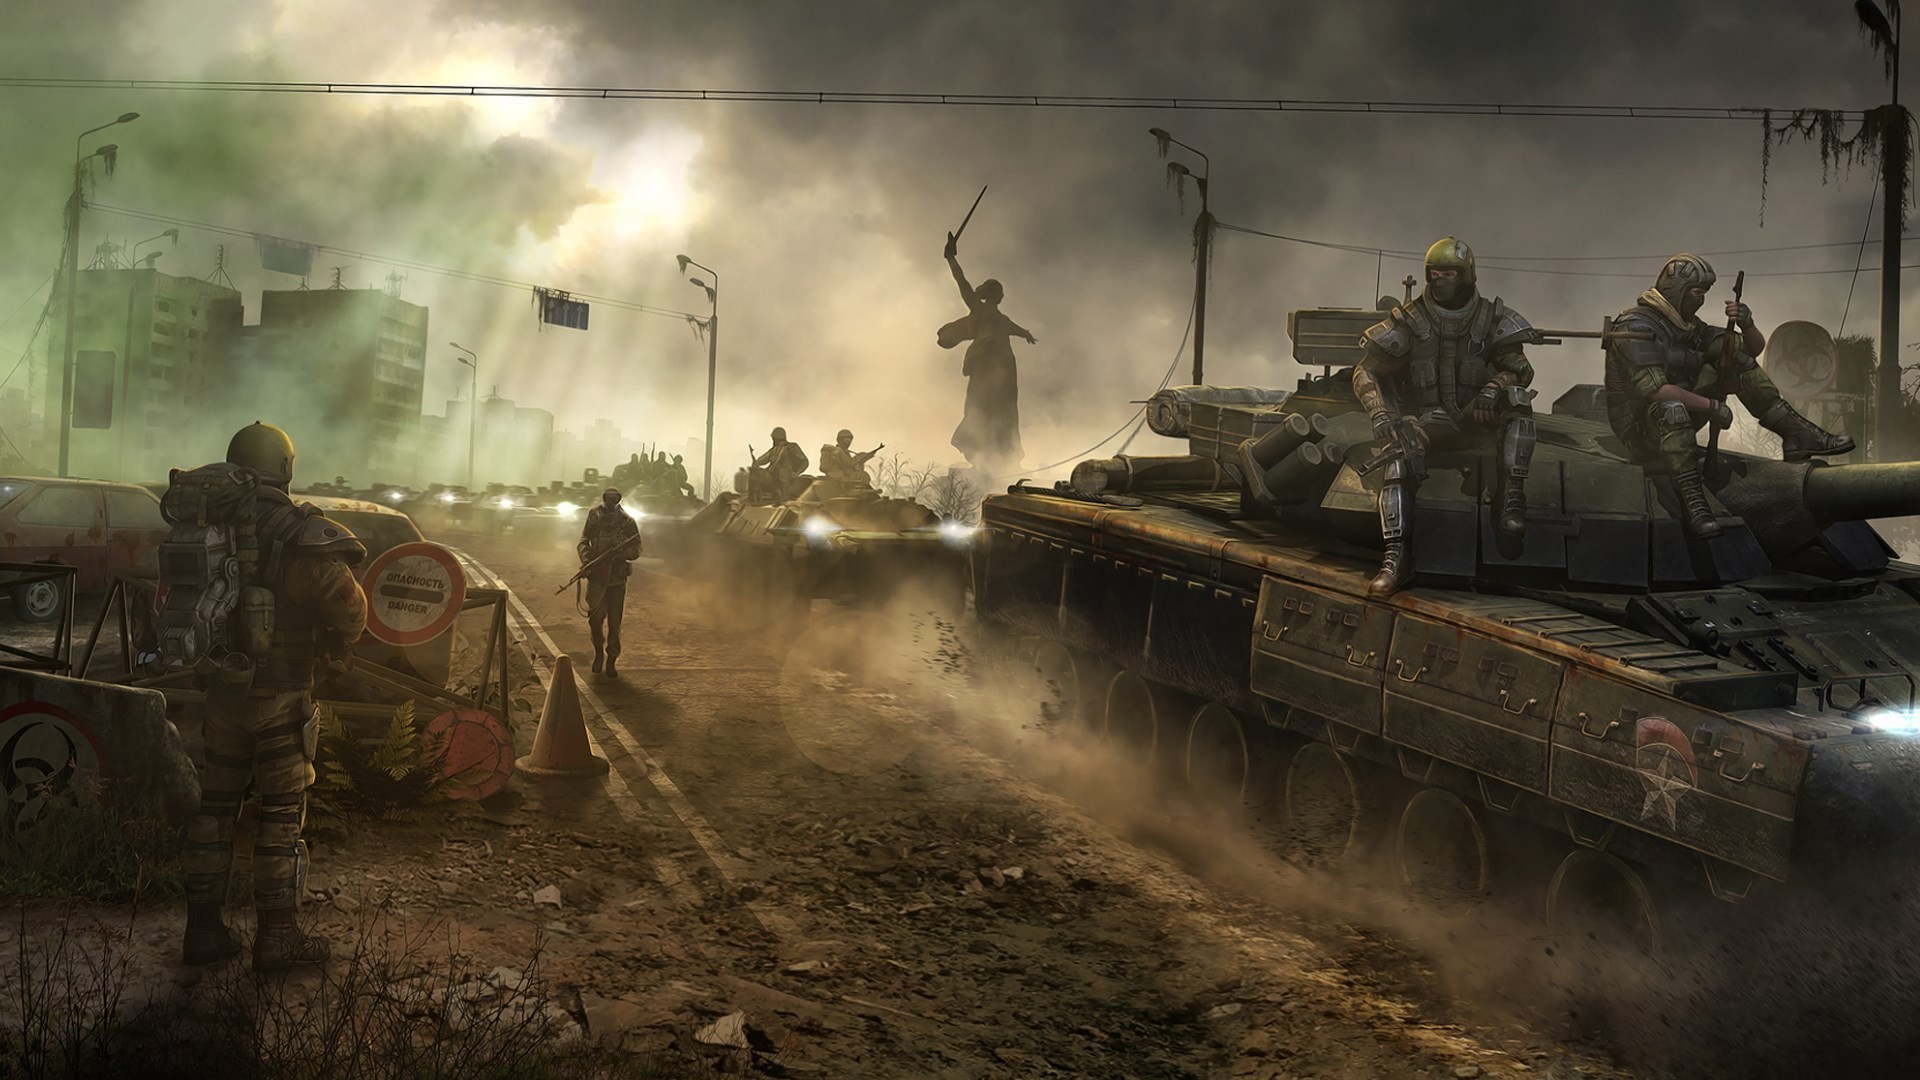 1920x1080 Post Apocalyptic Wallpapers April 2014